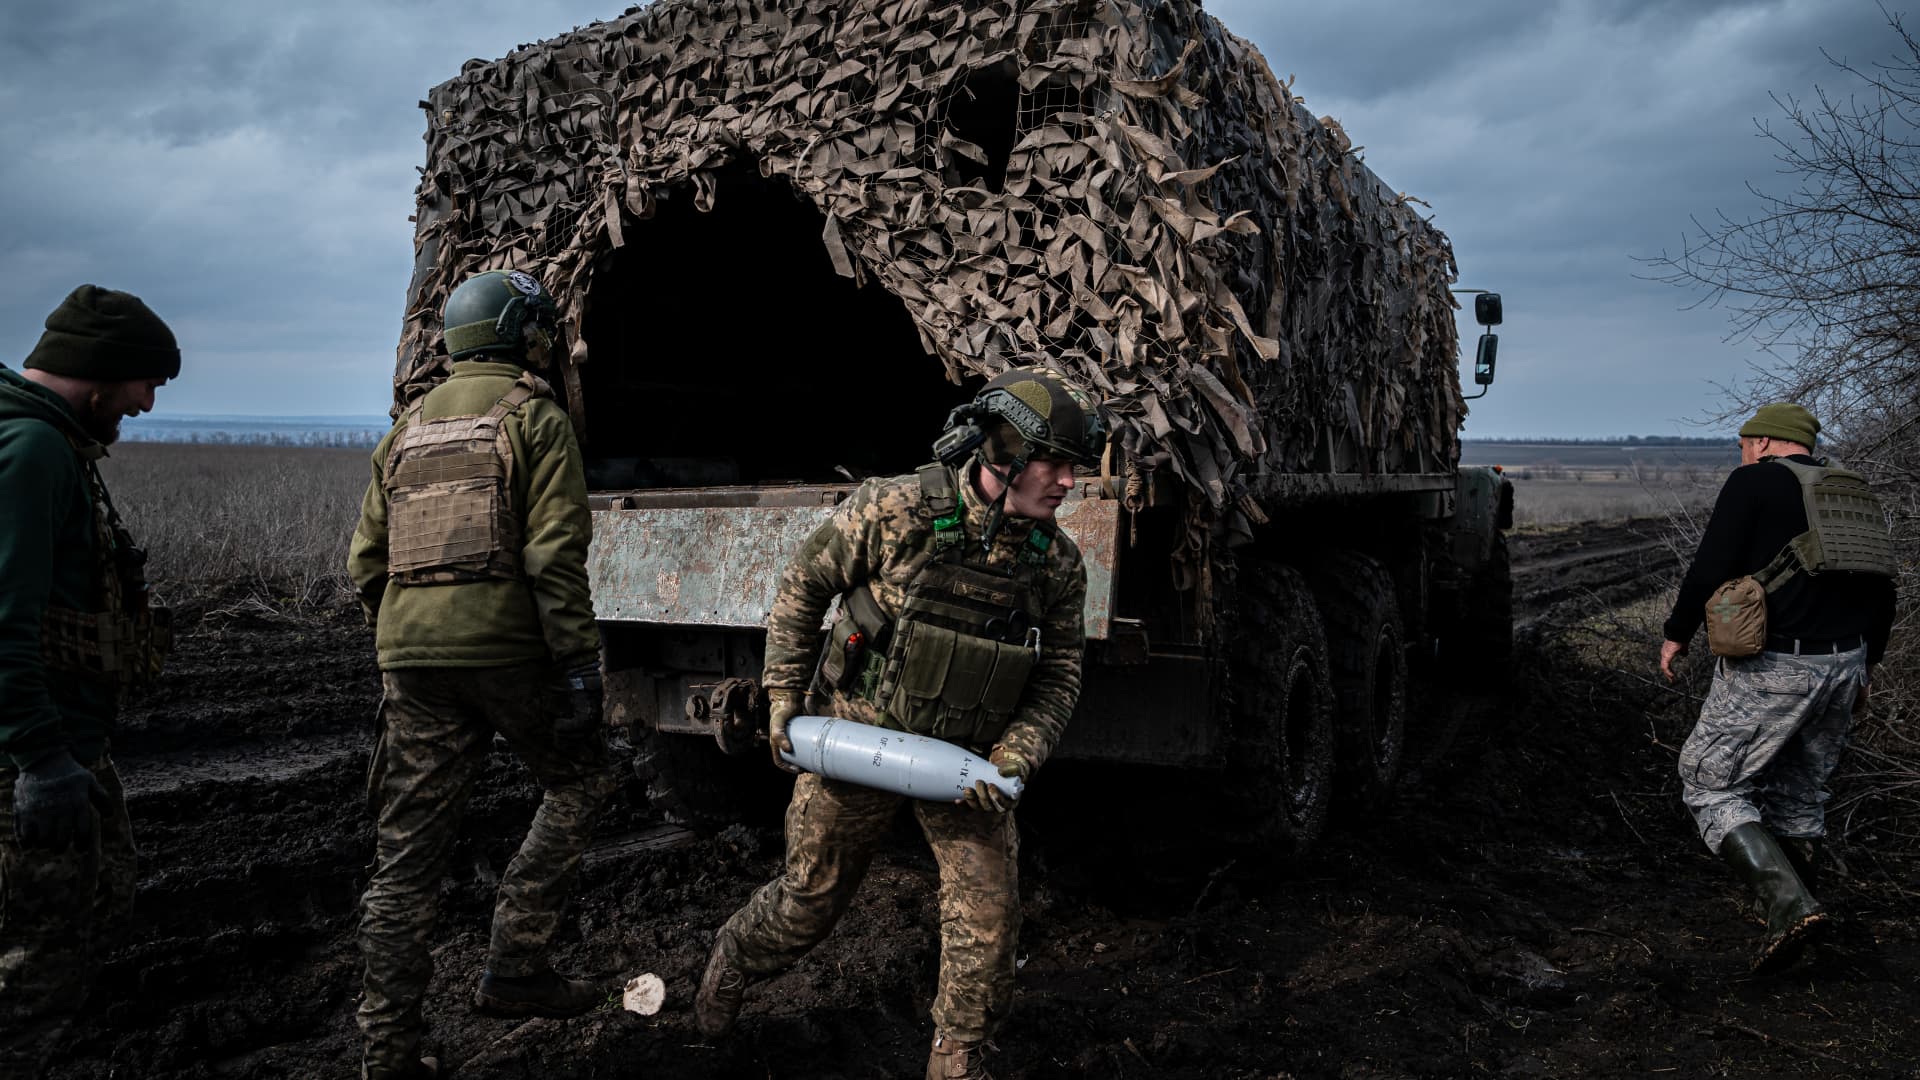 Ukrainian servicemen from the 10th Brigade unload heavy artillery ammunition at a position along the frontline outside of Soledar, Ukraine on March 11, 2023.